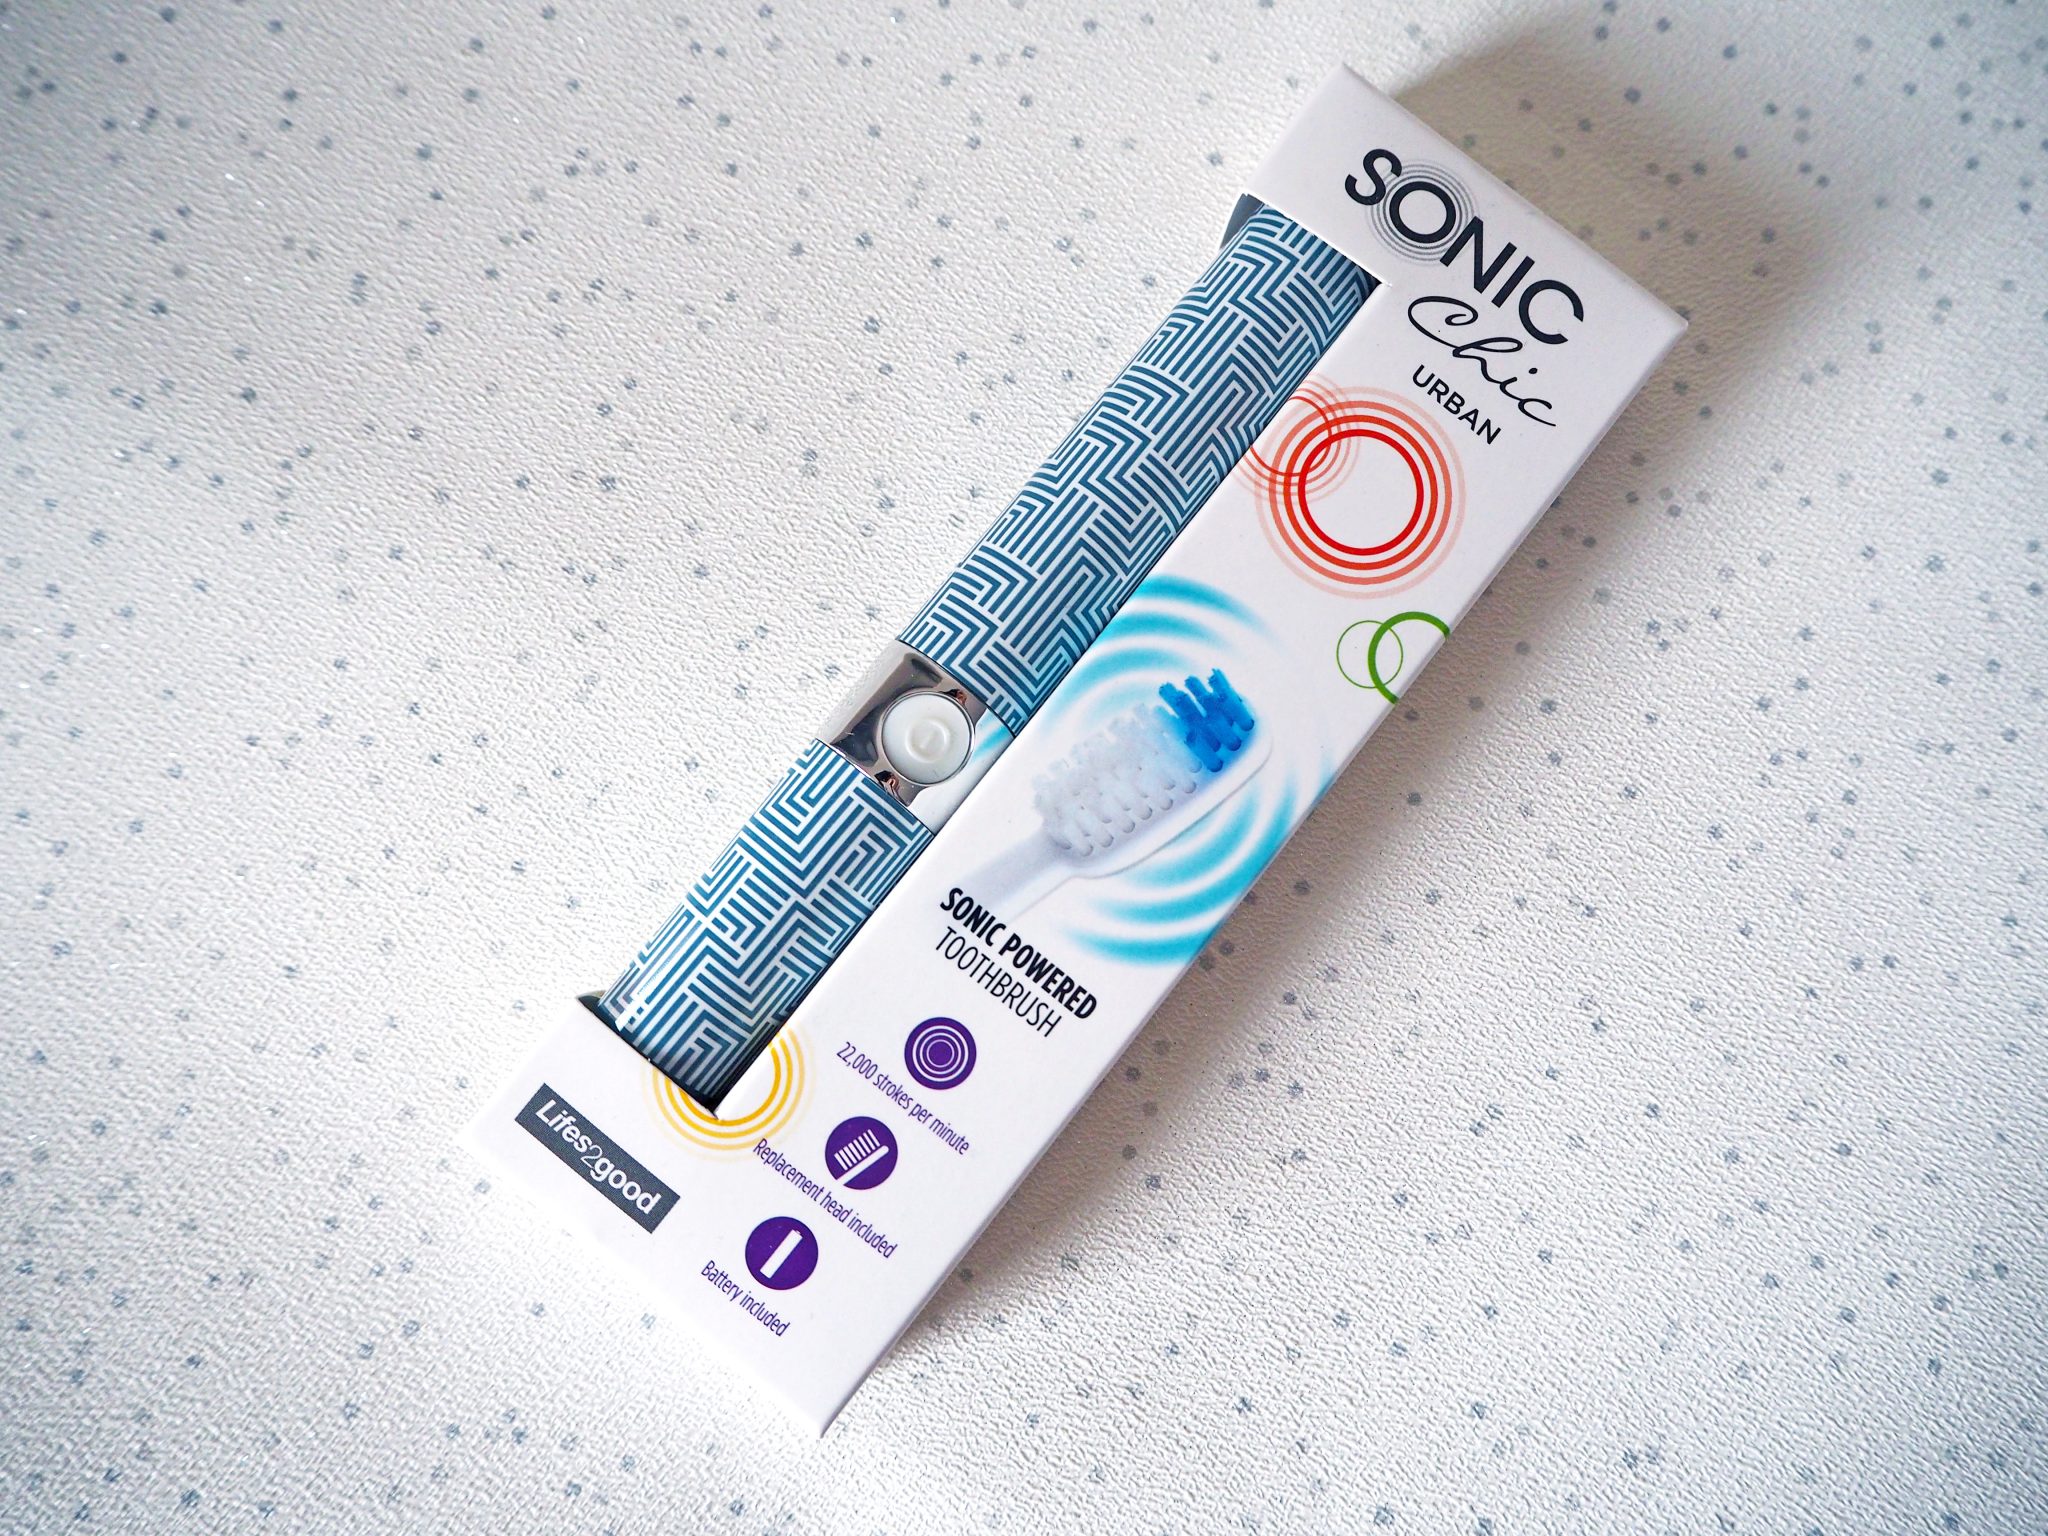 Laura Kate Lucas - Manchester Fashion, Fitness and Food Blogger | Sonic Chic Toothbrush Product Review